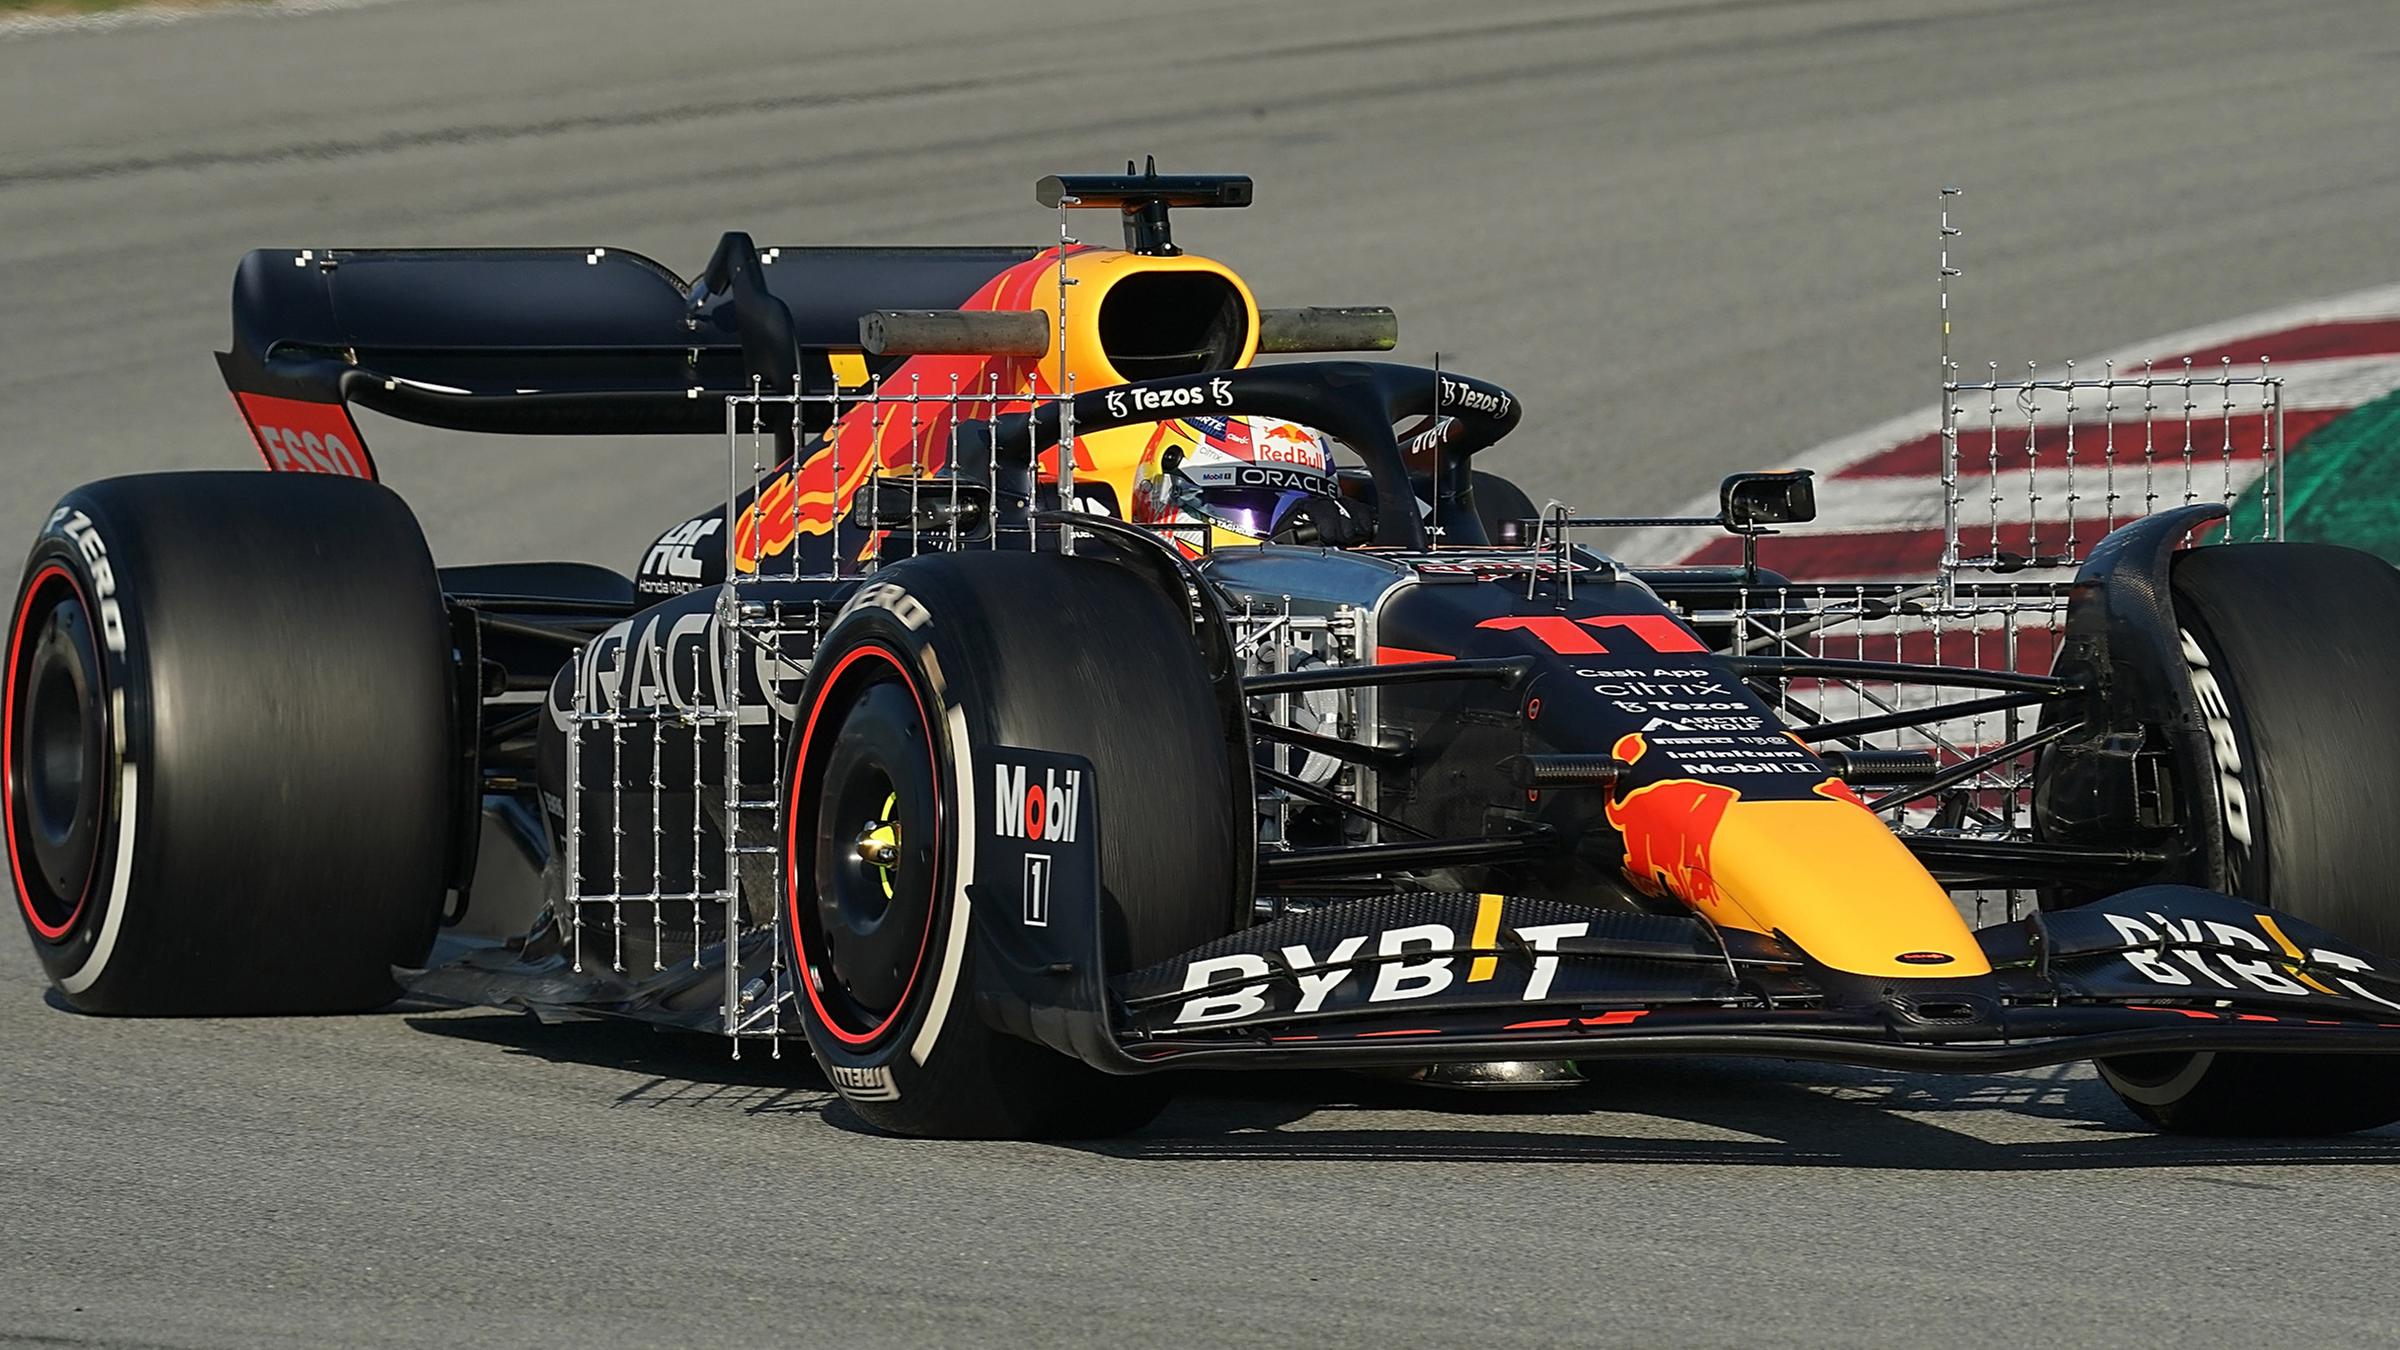 February 24, 2022, Spain, Barcelona: Test drives: Formula 1, test drives before the 2022 season, day 2: Sergio Perez of the Oracle Red Bull team from Mexico on the track in Barcelona.